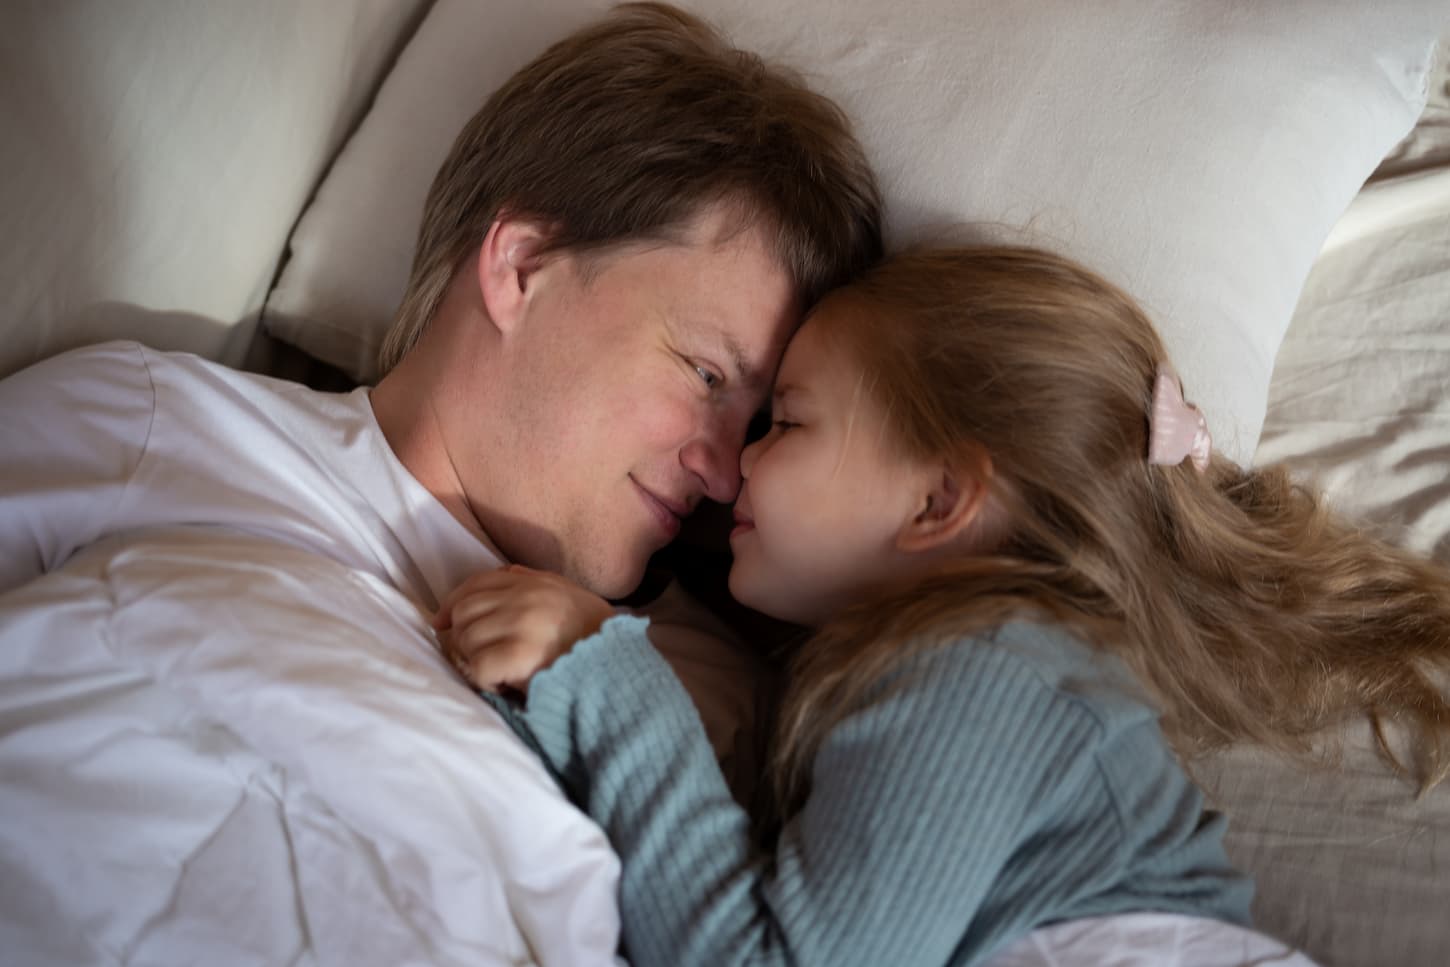 An image of a little cute girl hugging her dad while lying together in bed.